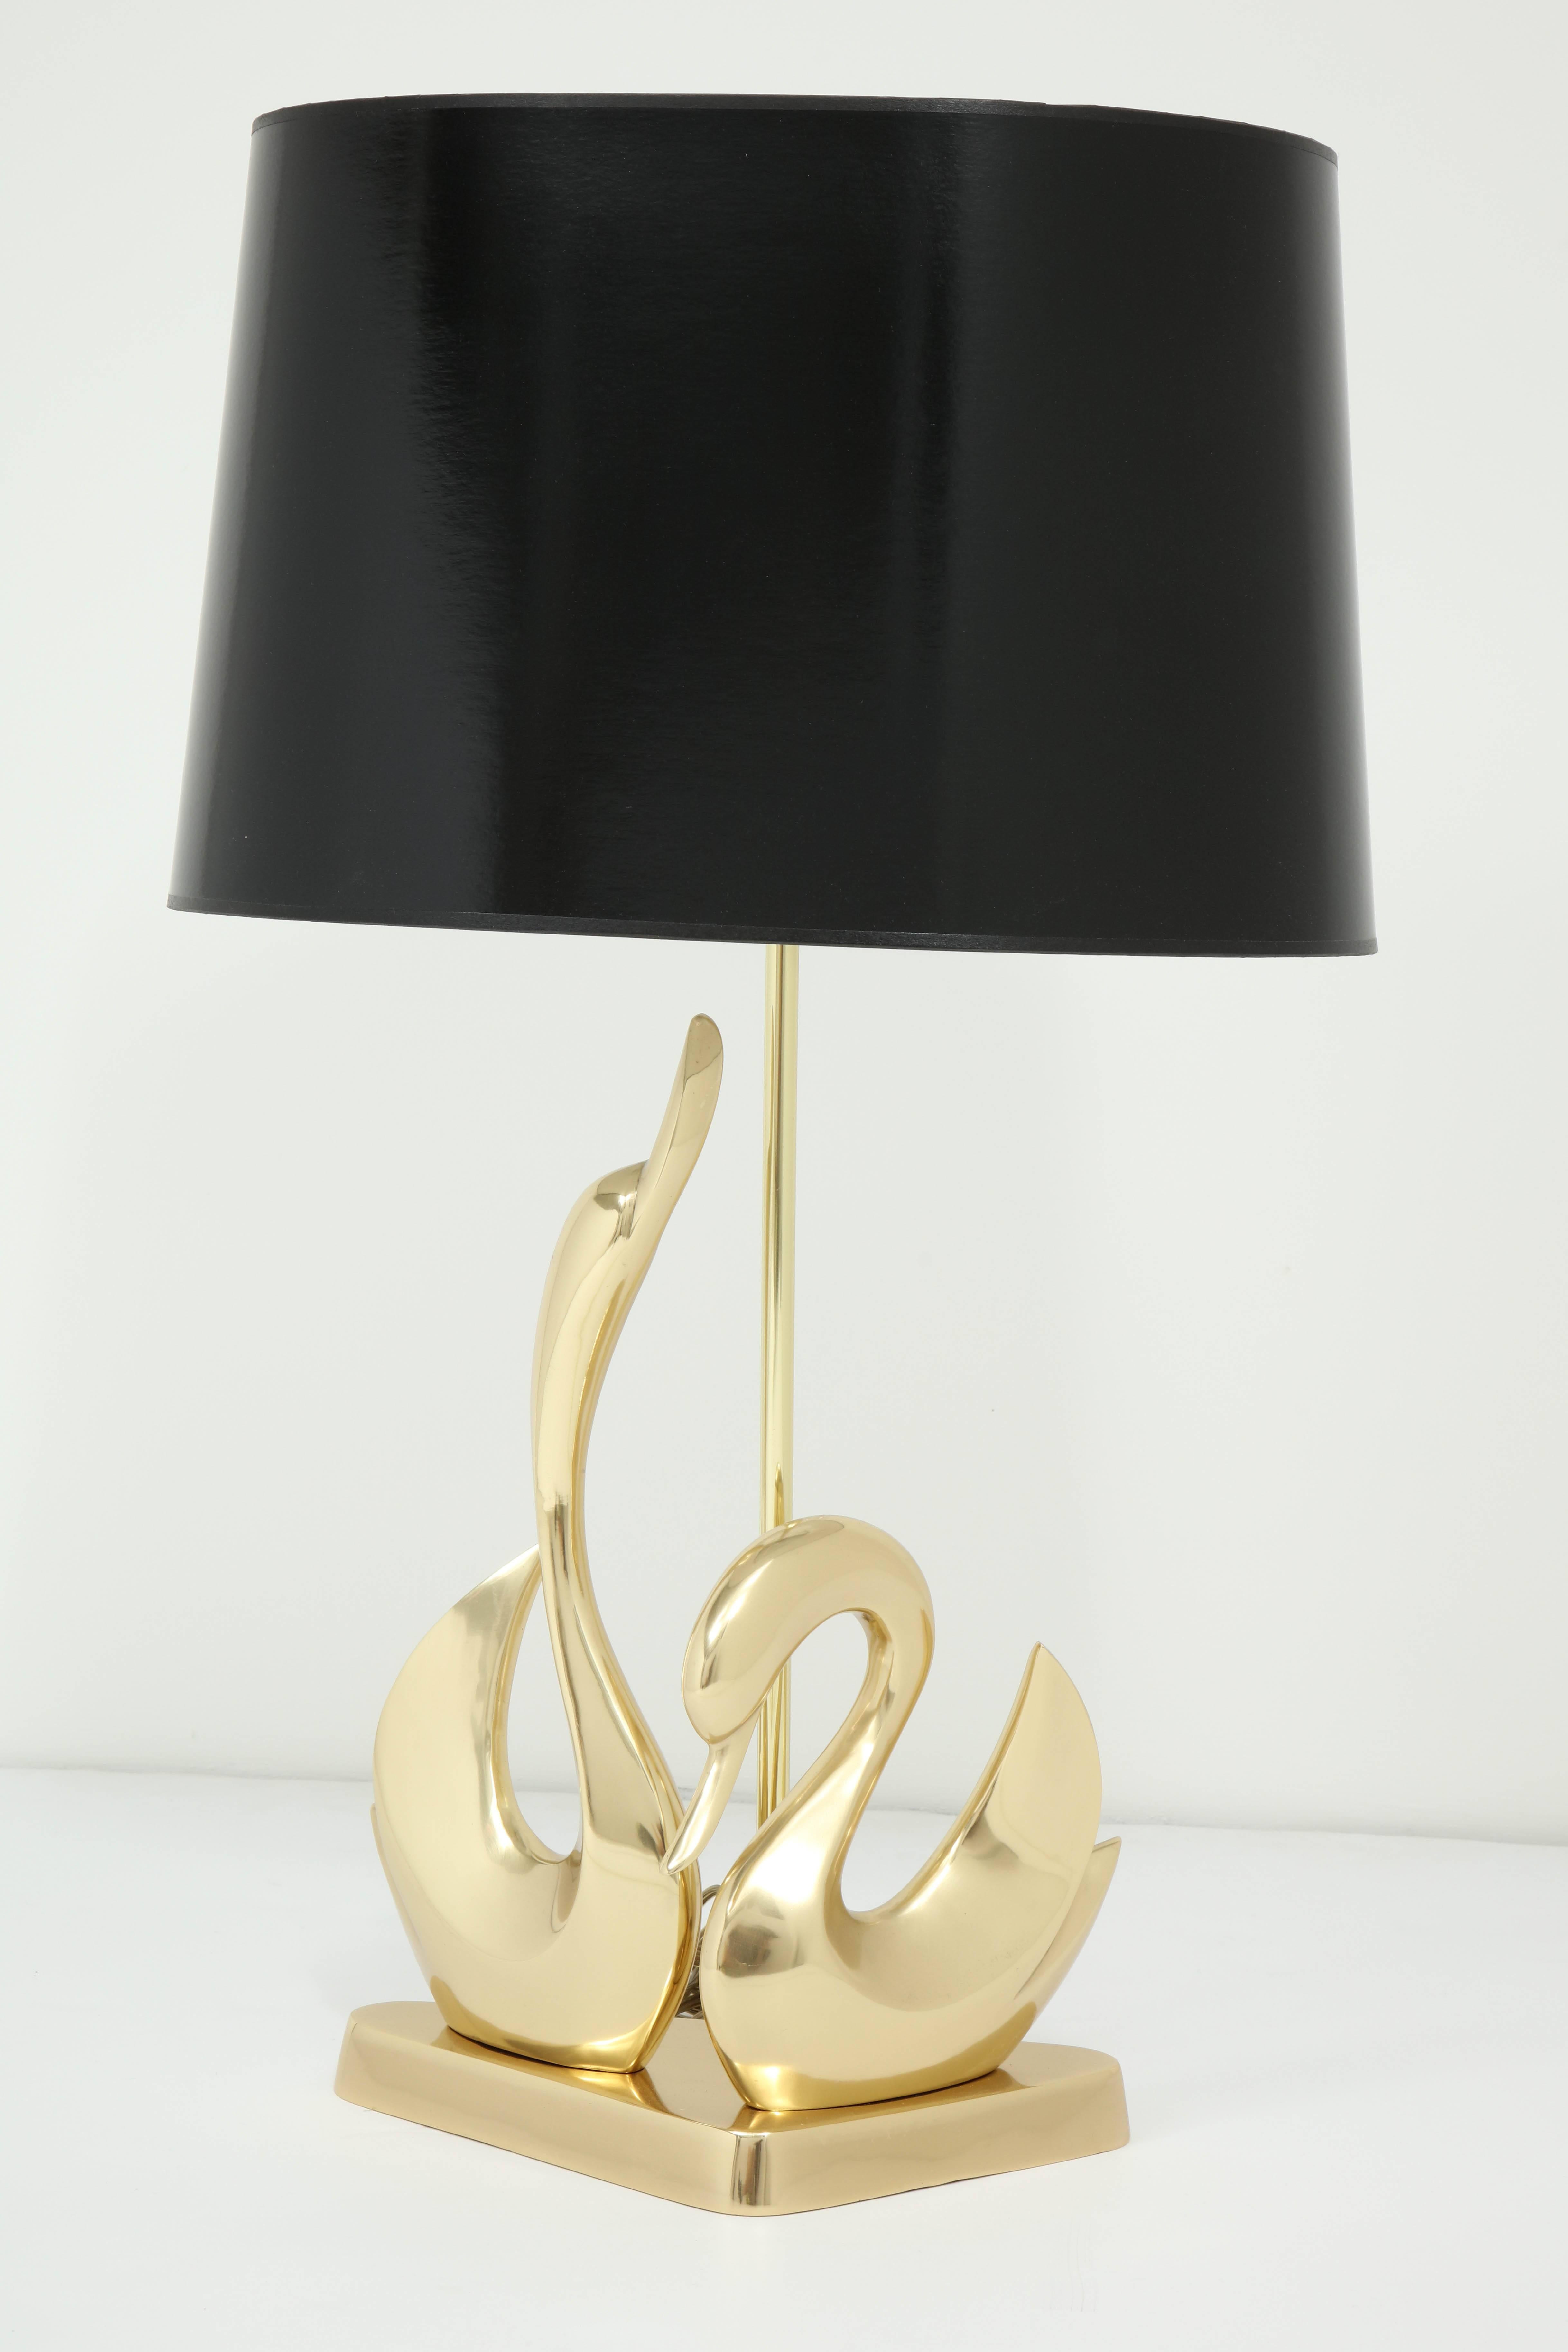 Decorative midcentury brass table lamp with two swans, circa 1950, Italy.